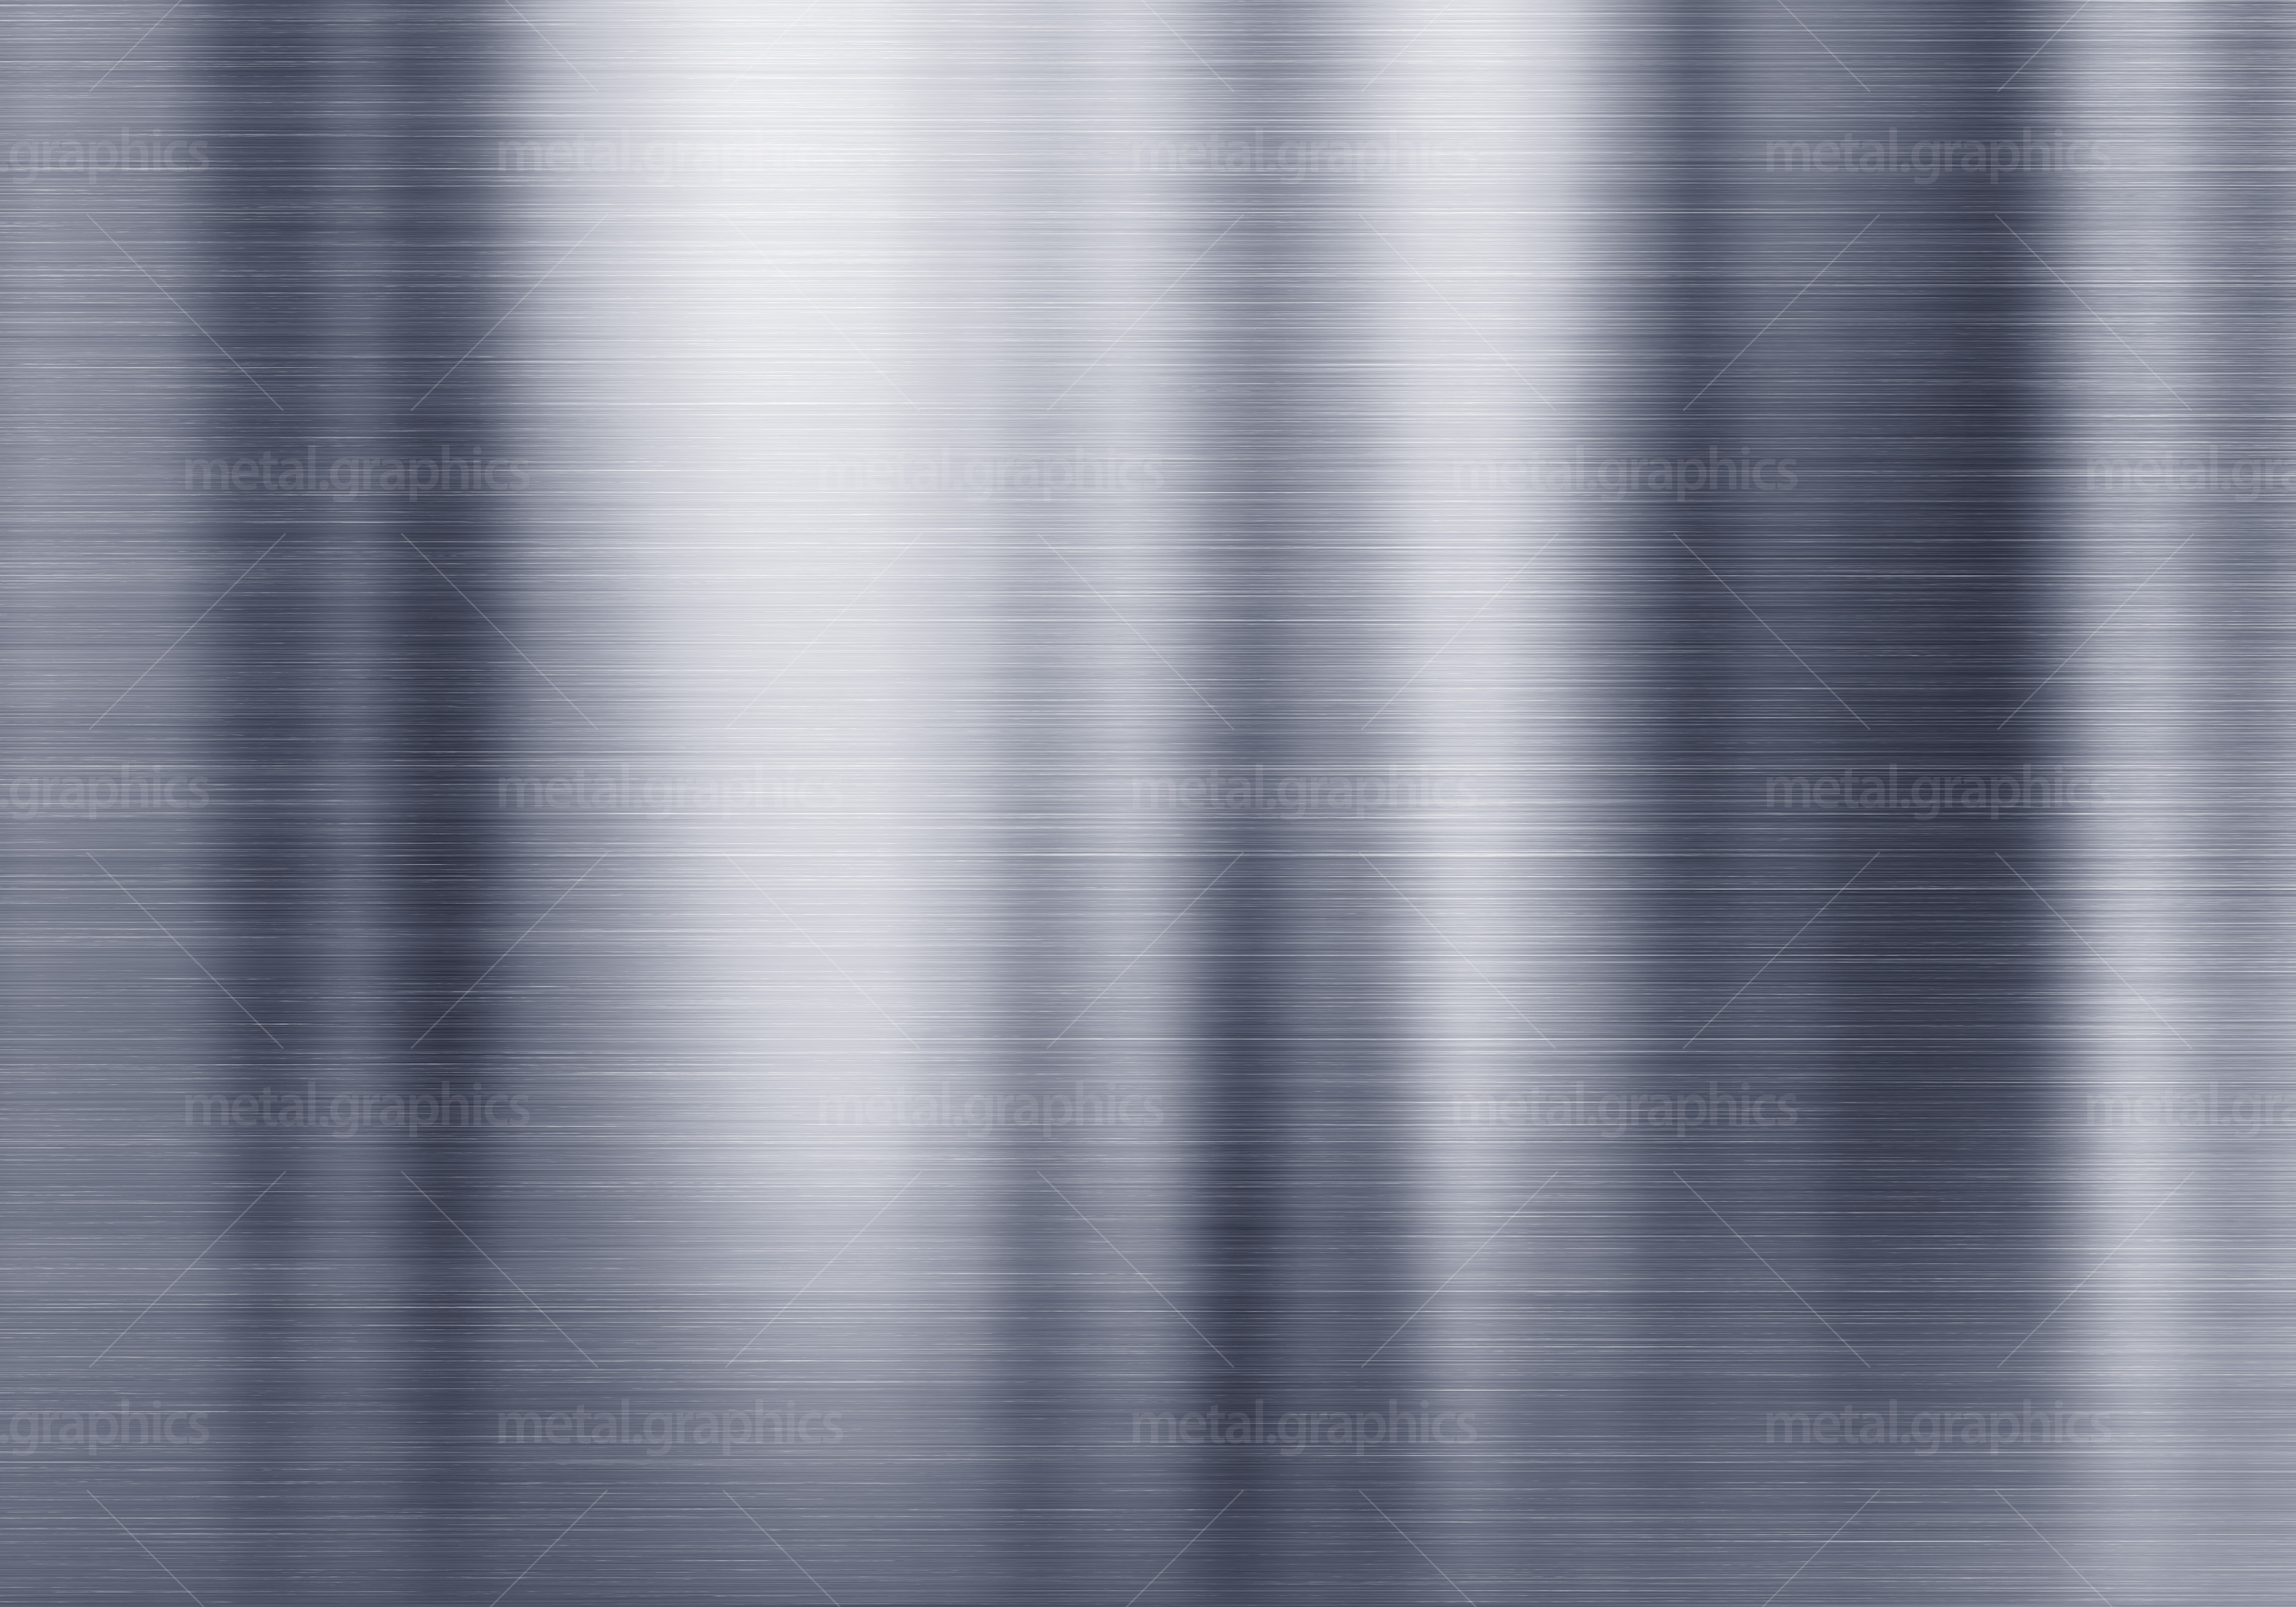 Shiny Brushed Metal Texture Background Free Photo Stainless Steel Texture M...